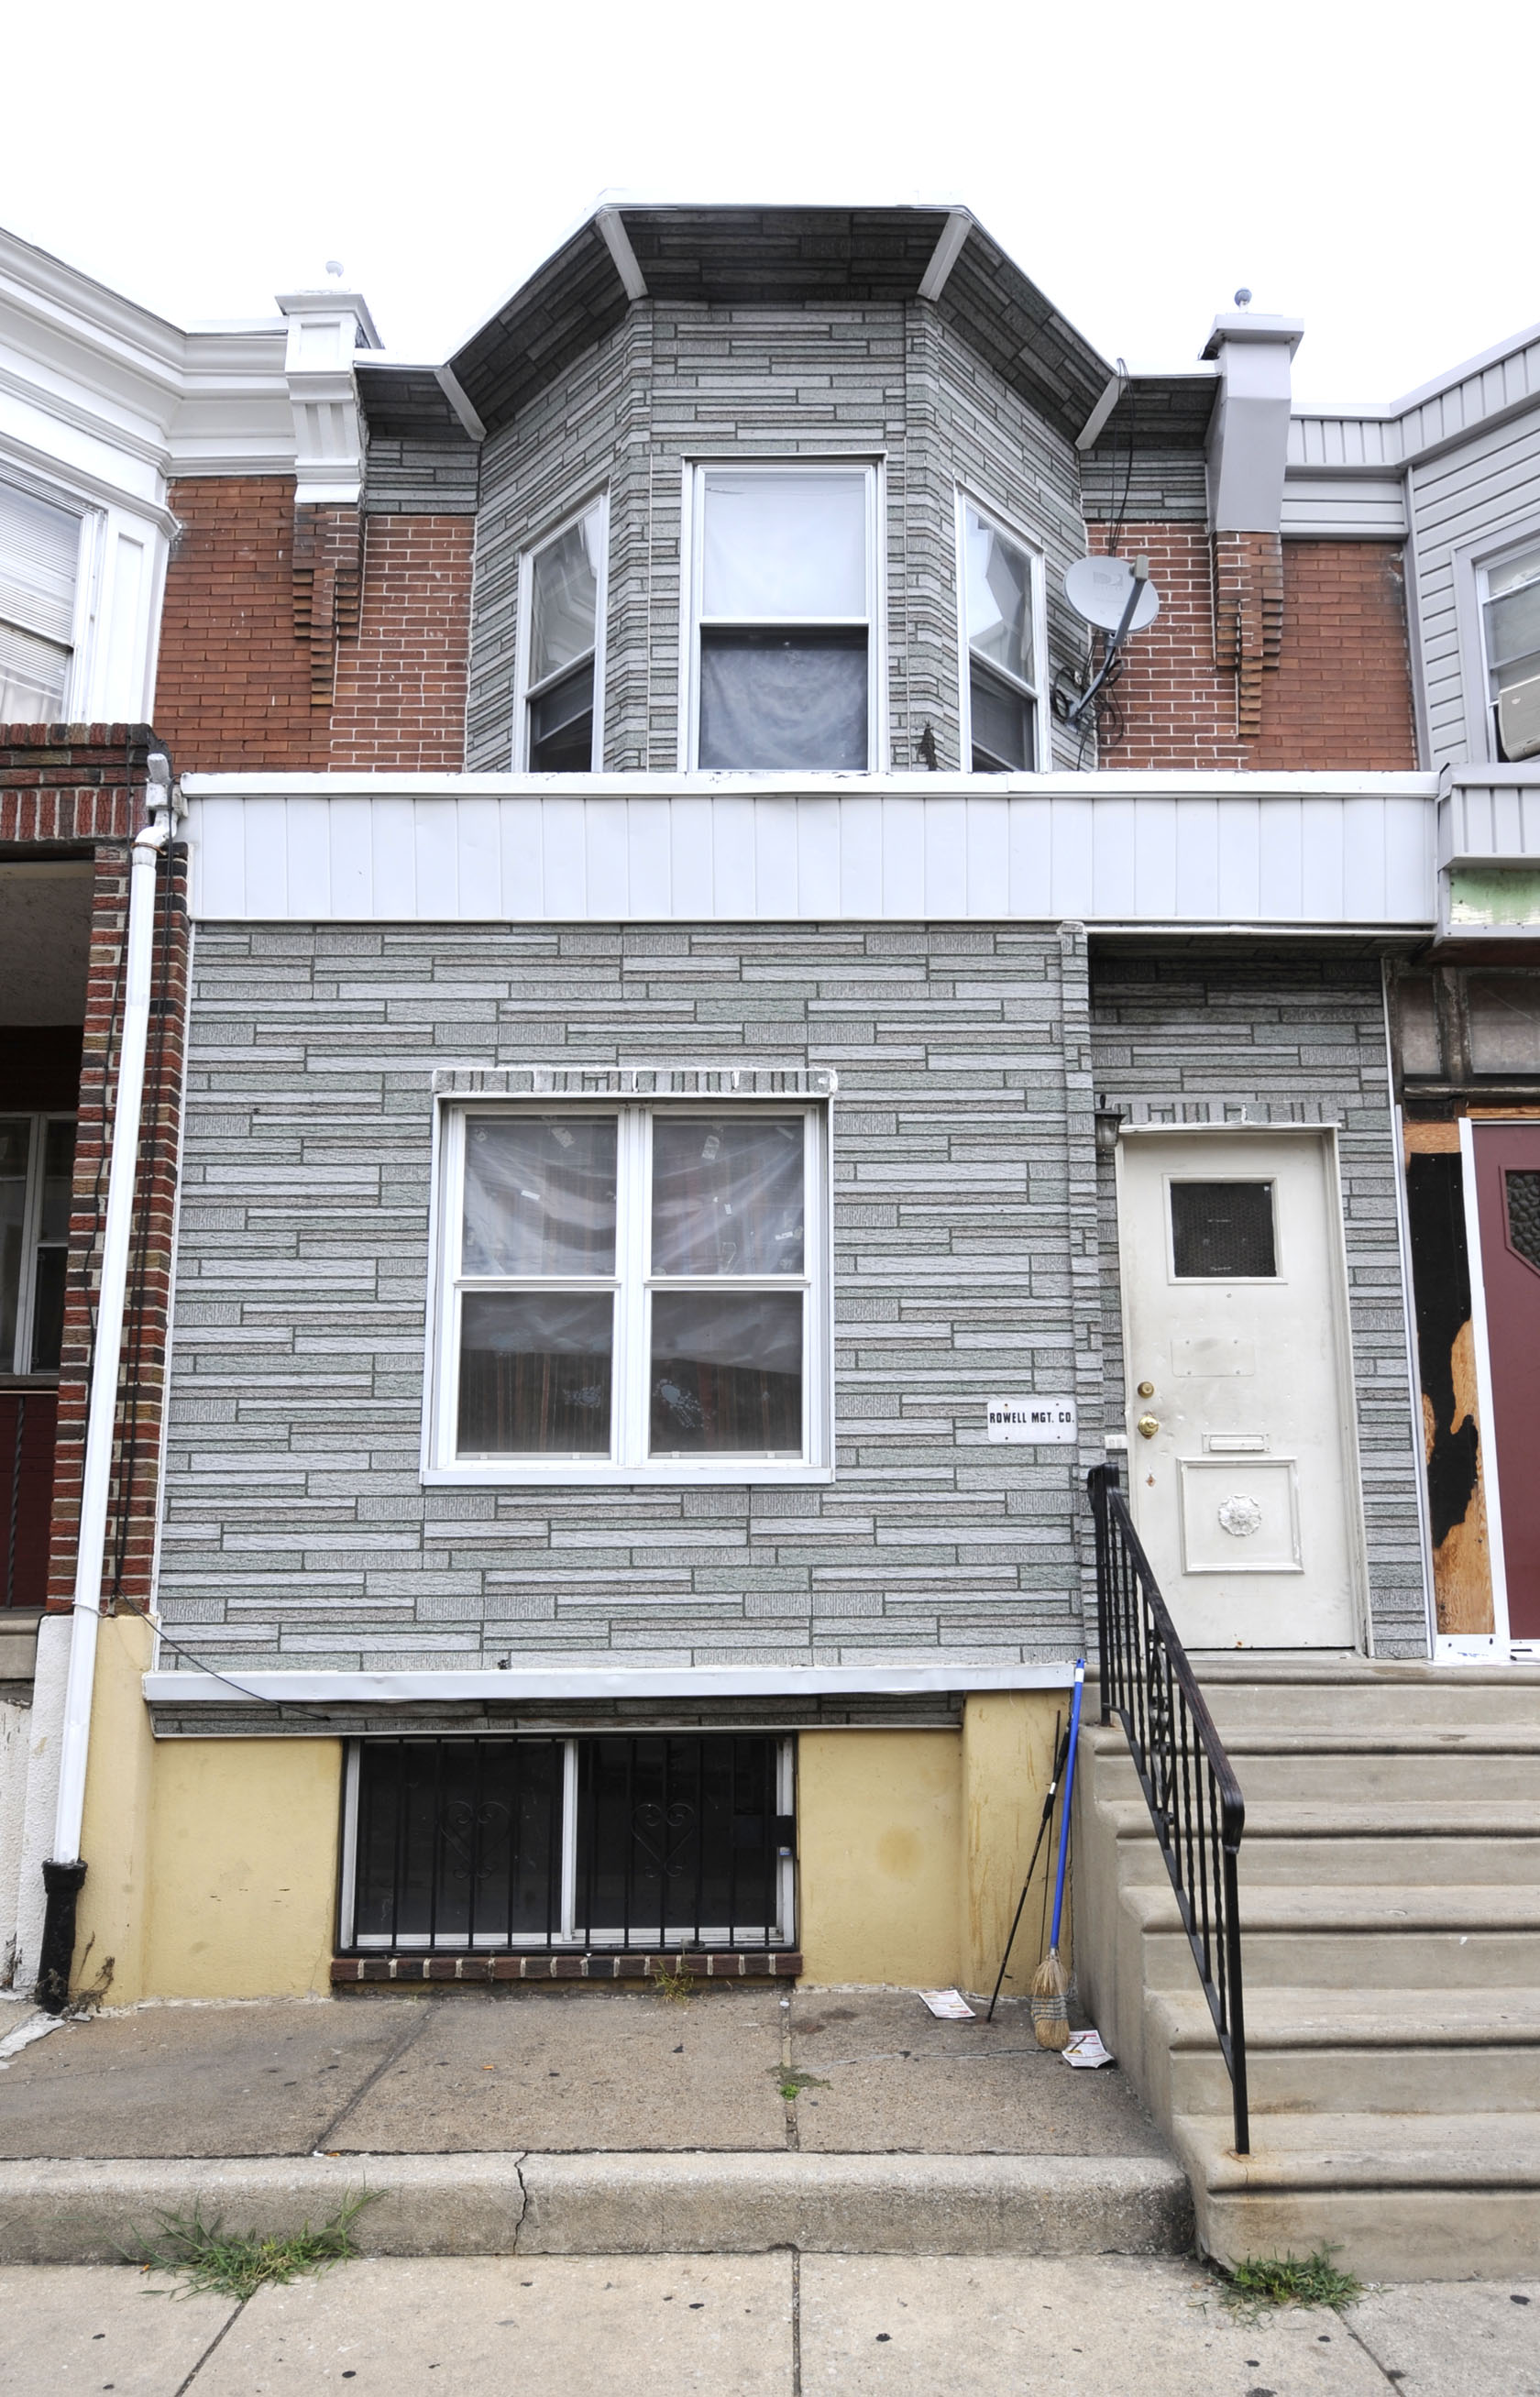 2527 S. Felton St. is owned by William Rowell, a landlord with many delinquent properties. (Clem Murray / Inquirer)